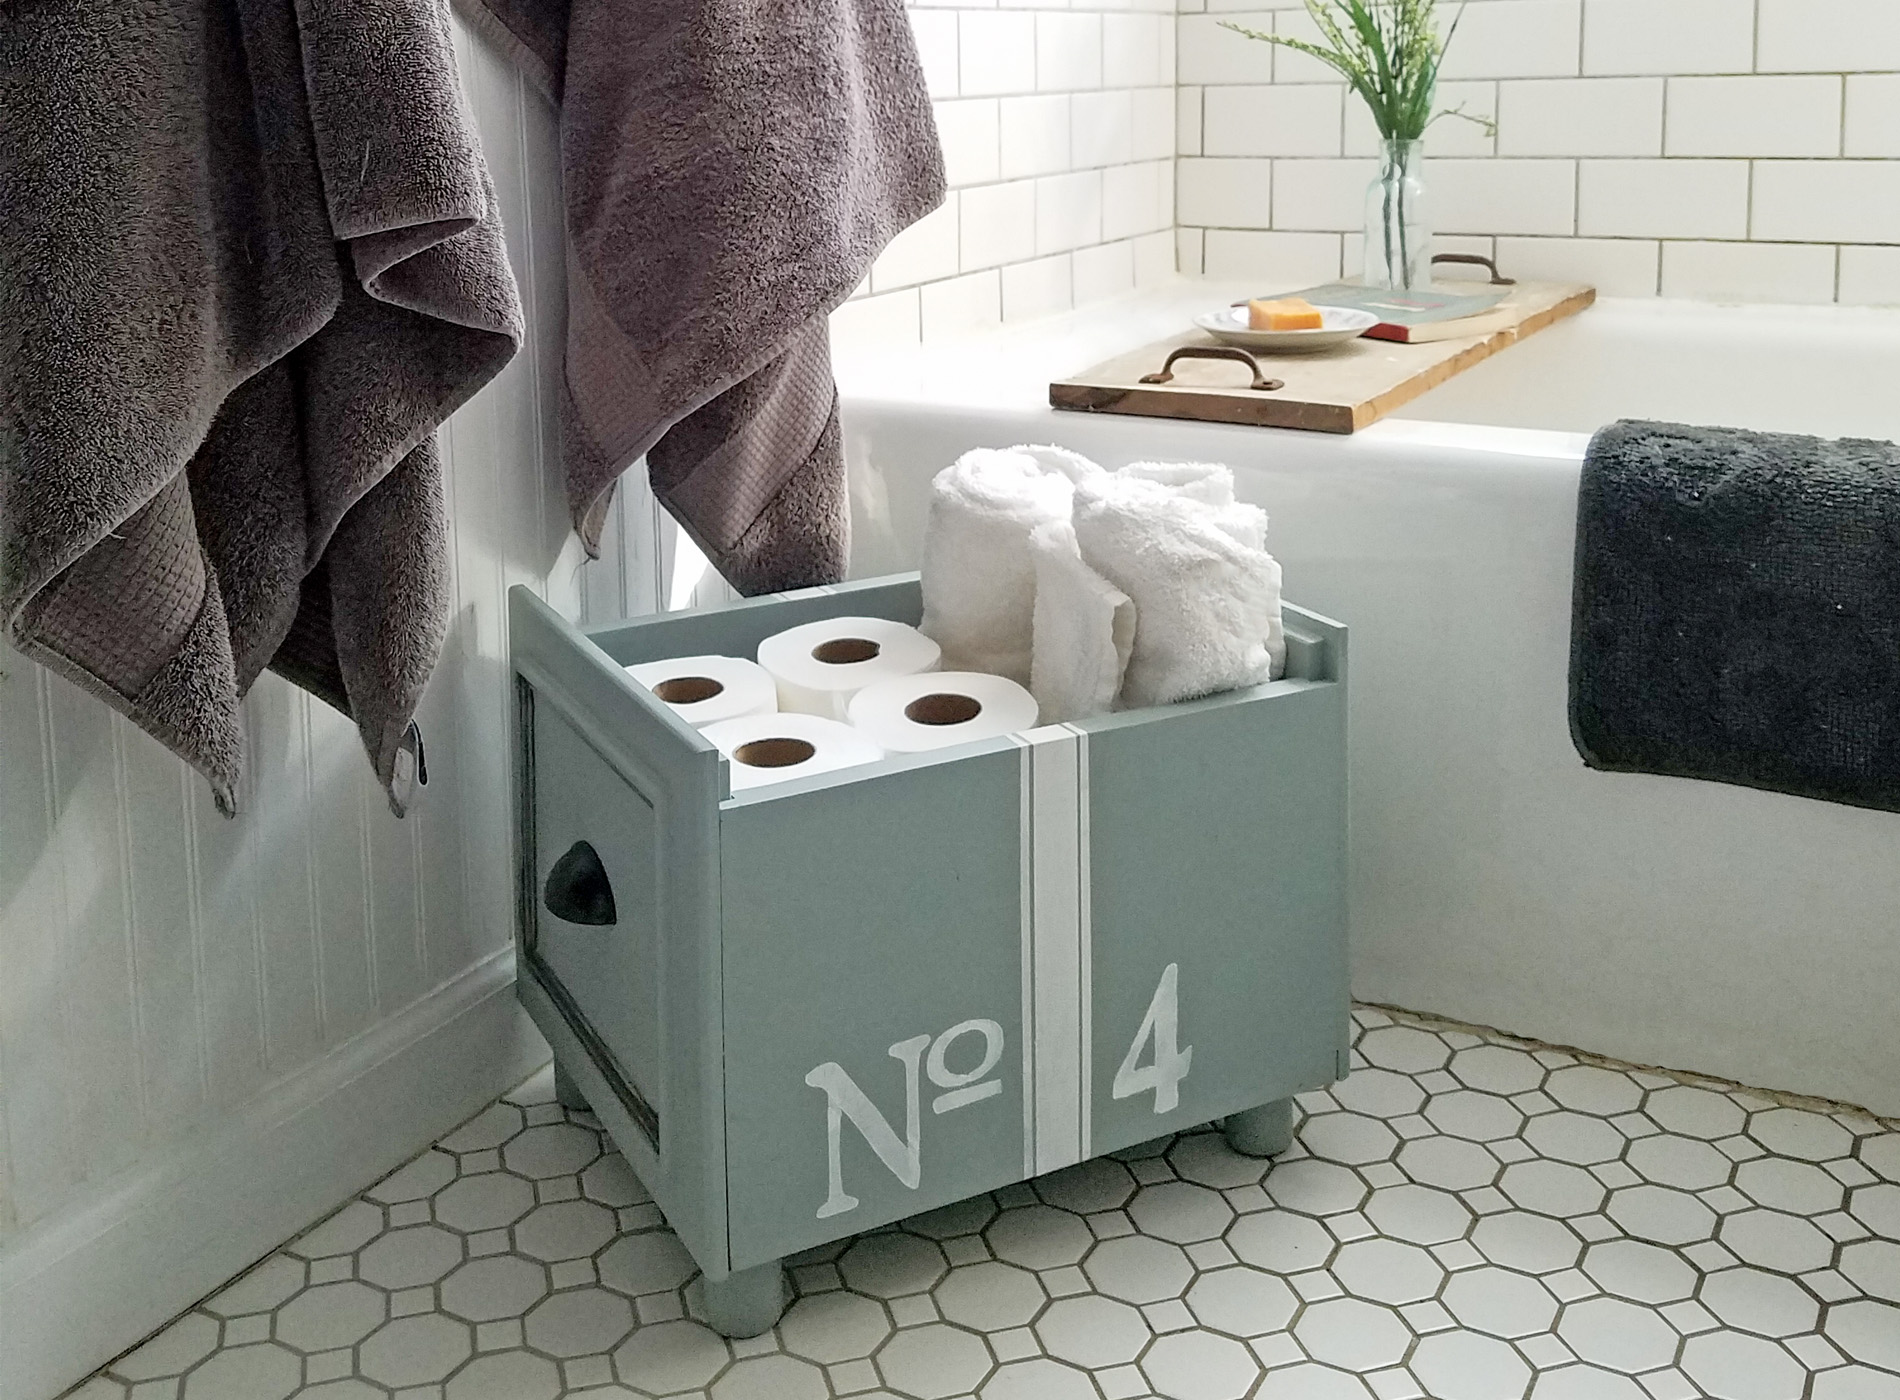 Featured DIY Storage from Repurposed Materials by Prodigal Pieces | prodigalpieces.com